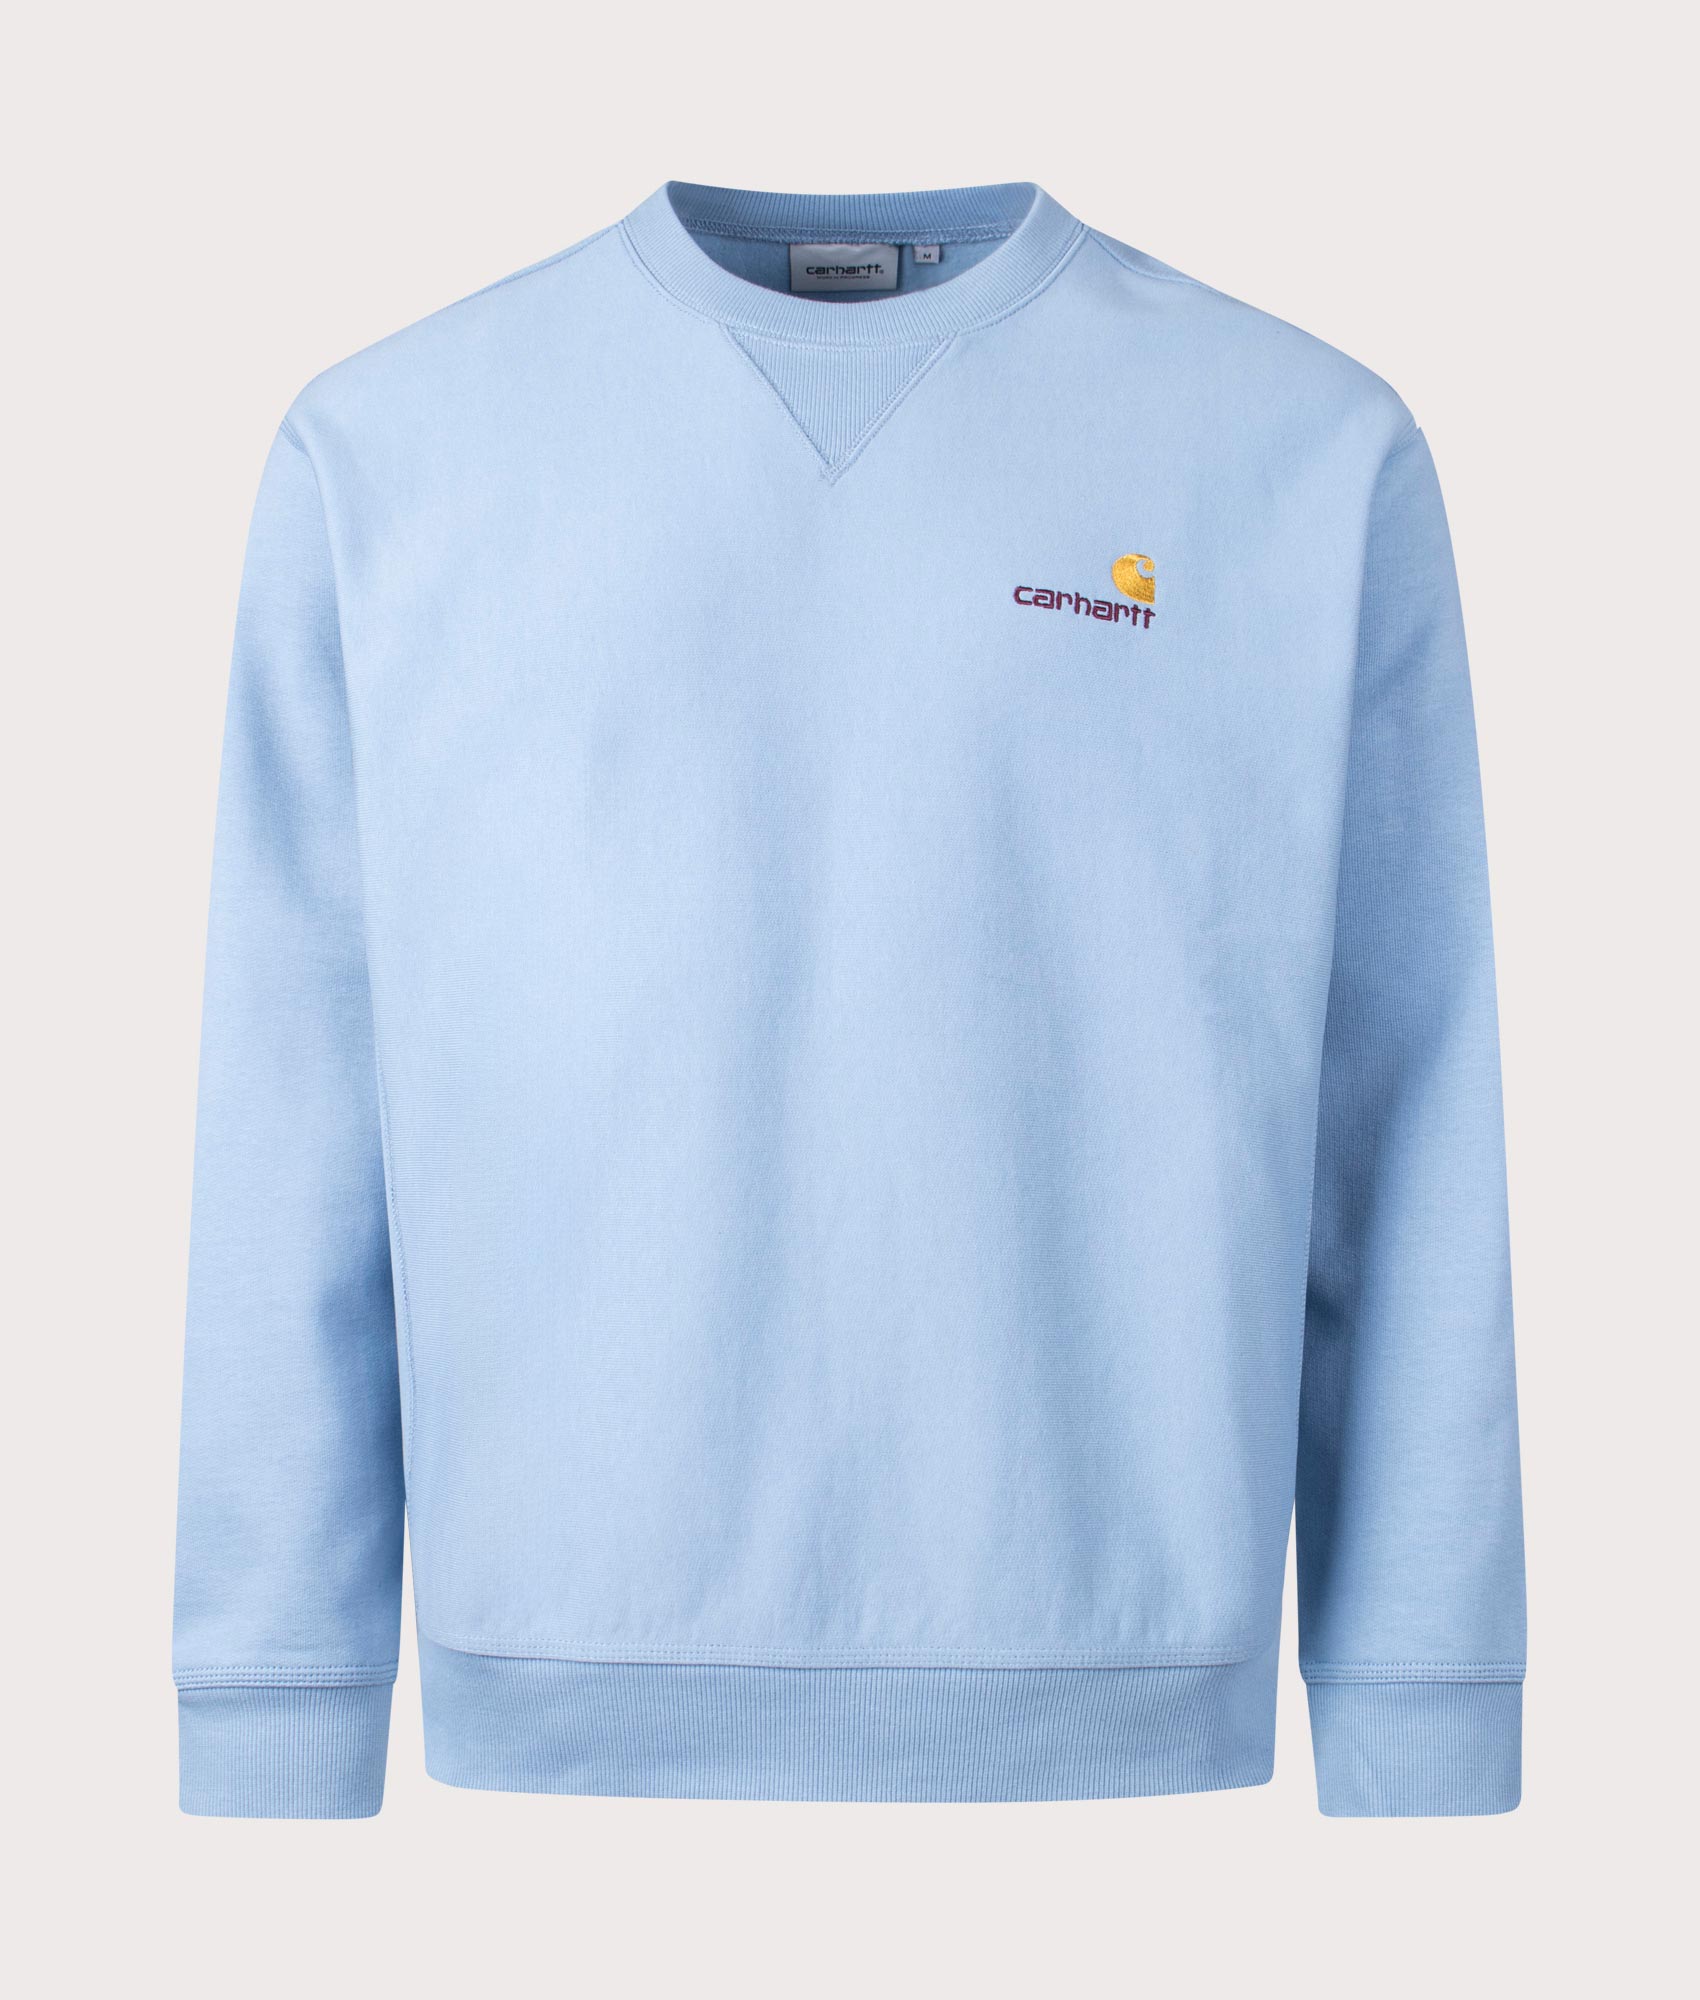 Carhartt WIP Mens Relaxed Fit American Script Sweatshirt - Colour: 0F4XX Frosted Blue - Size: Small